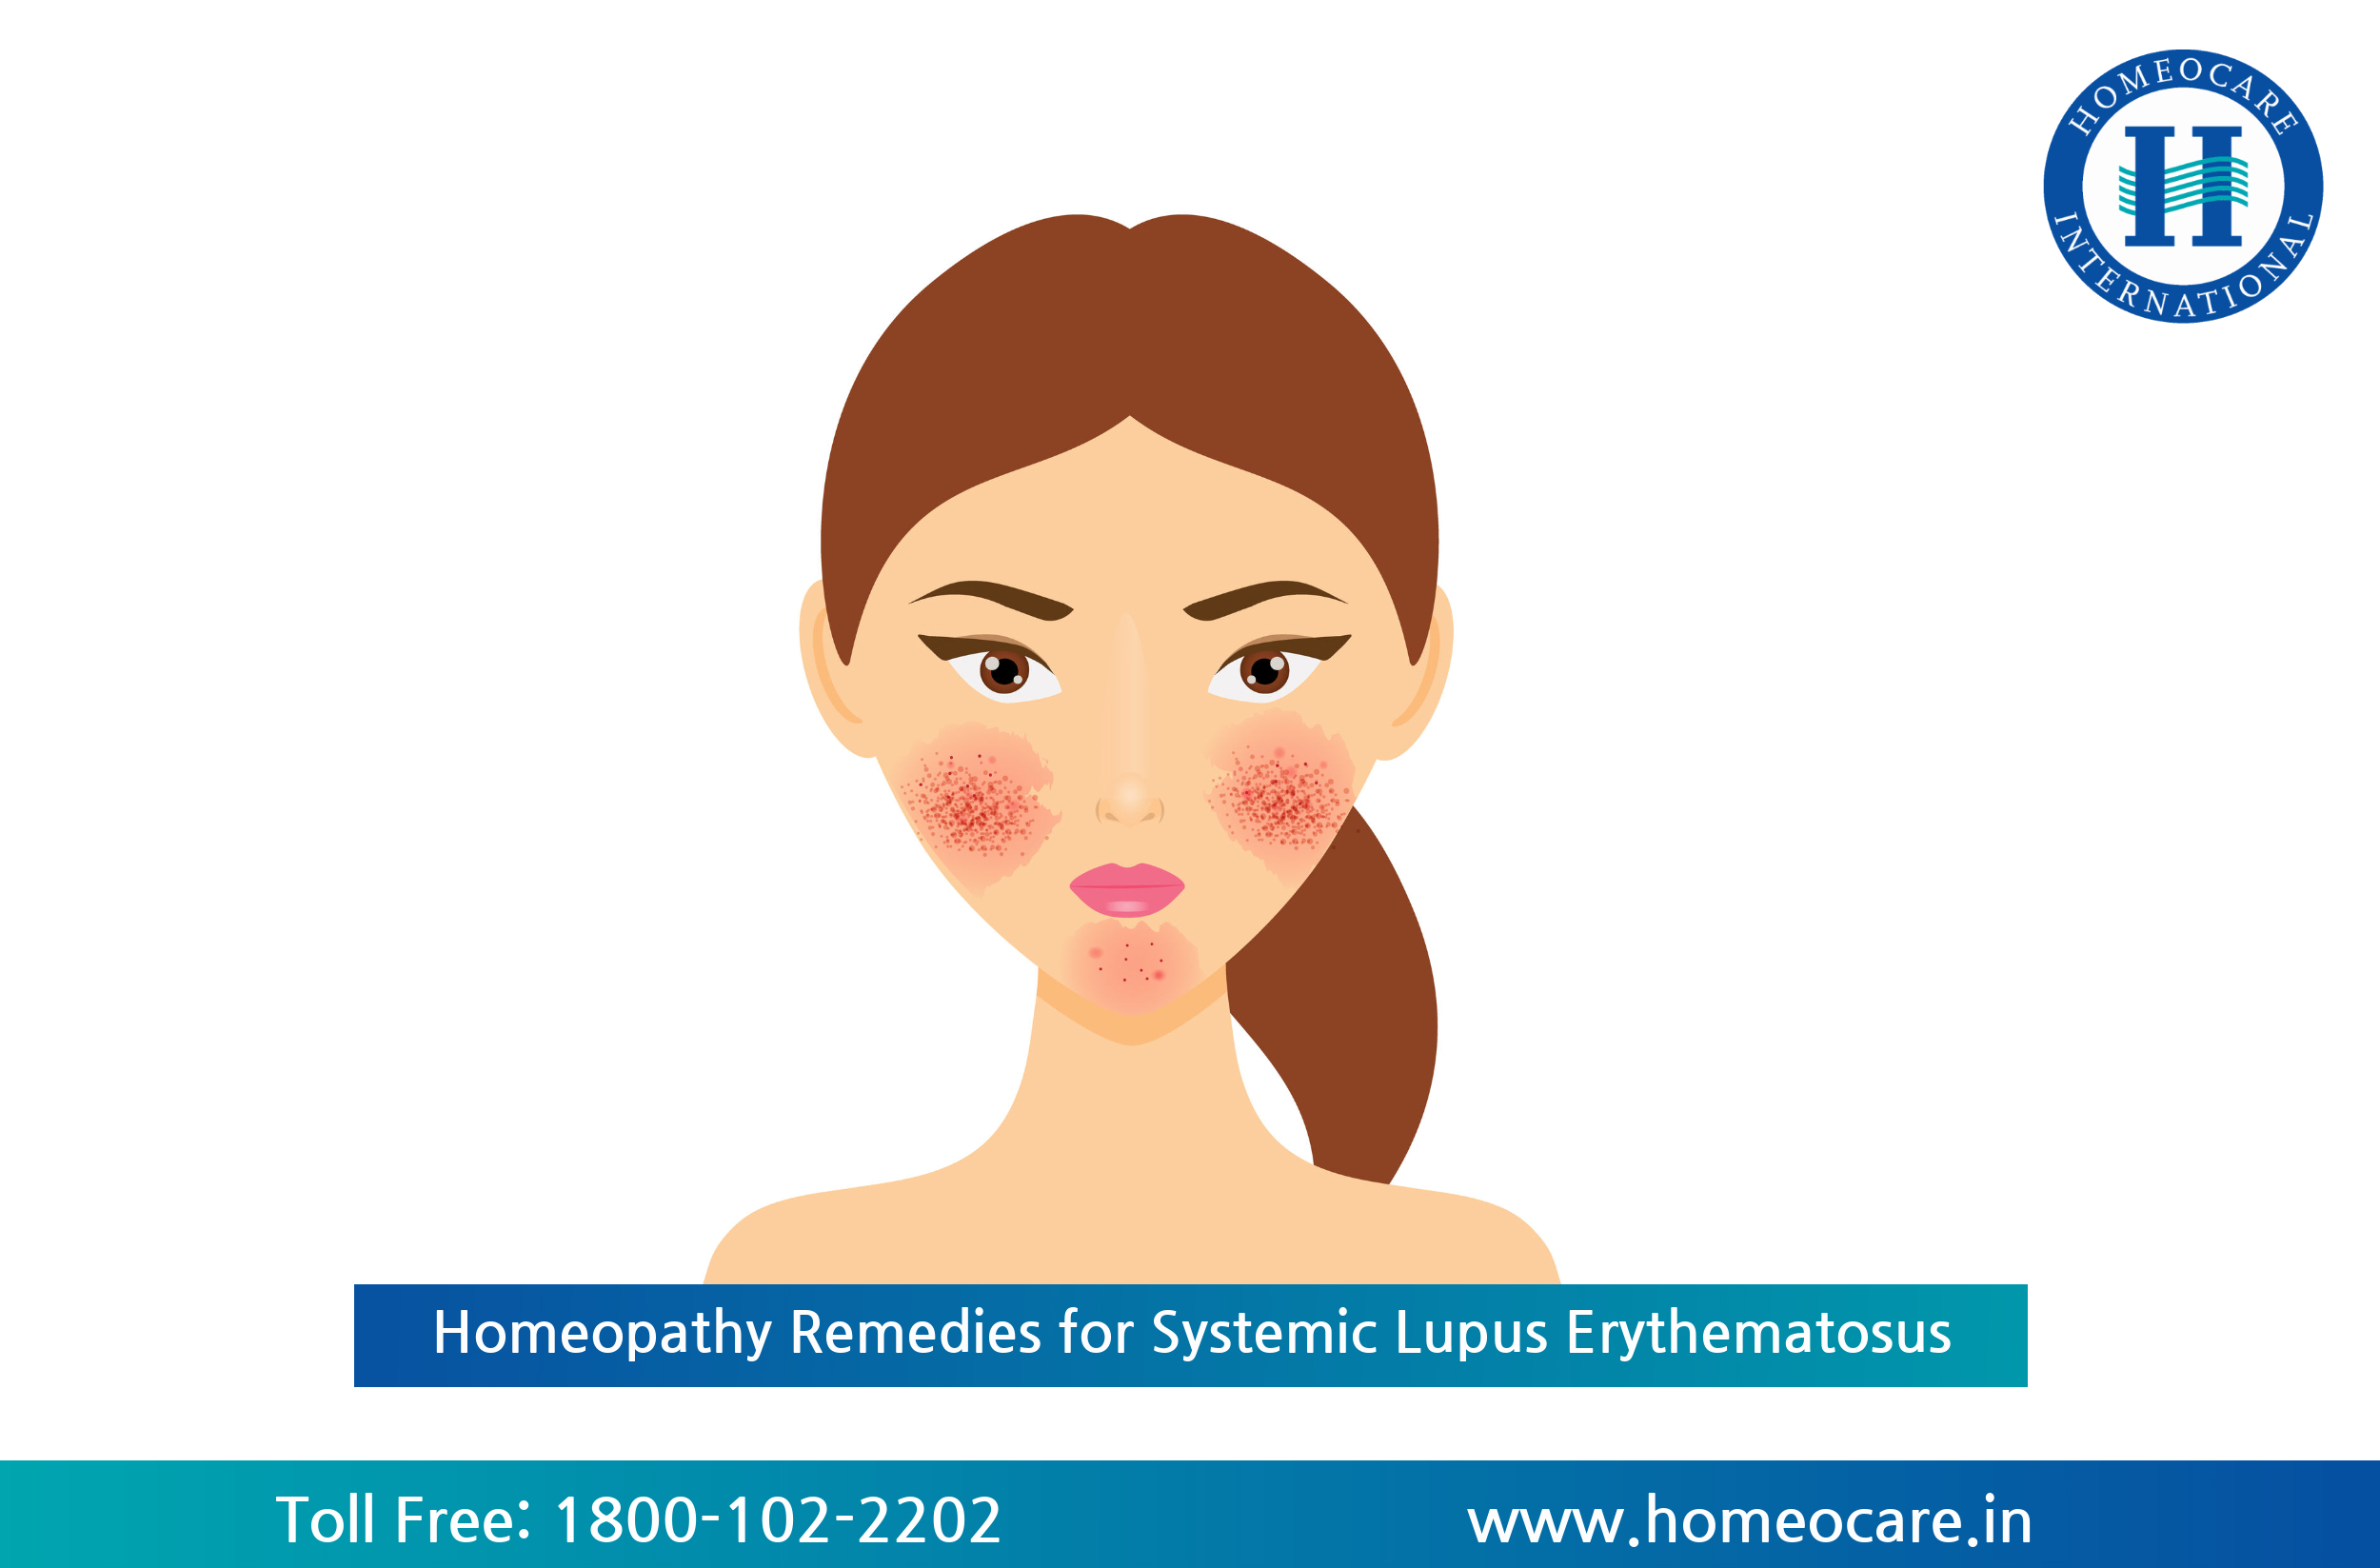 Homeopathic Remedies for Systemic Lupus Erythematosus